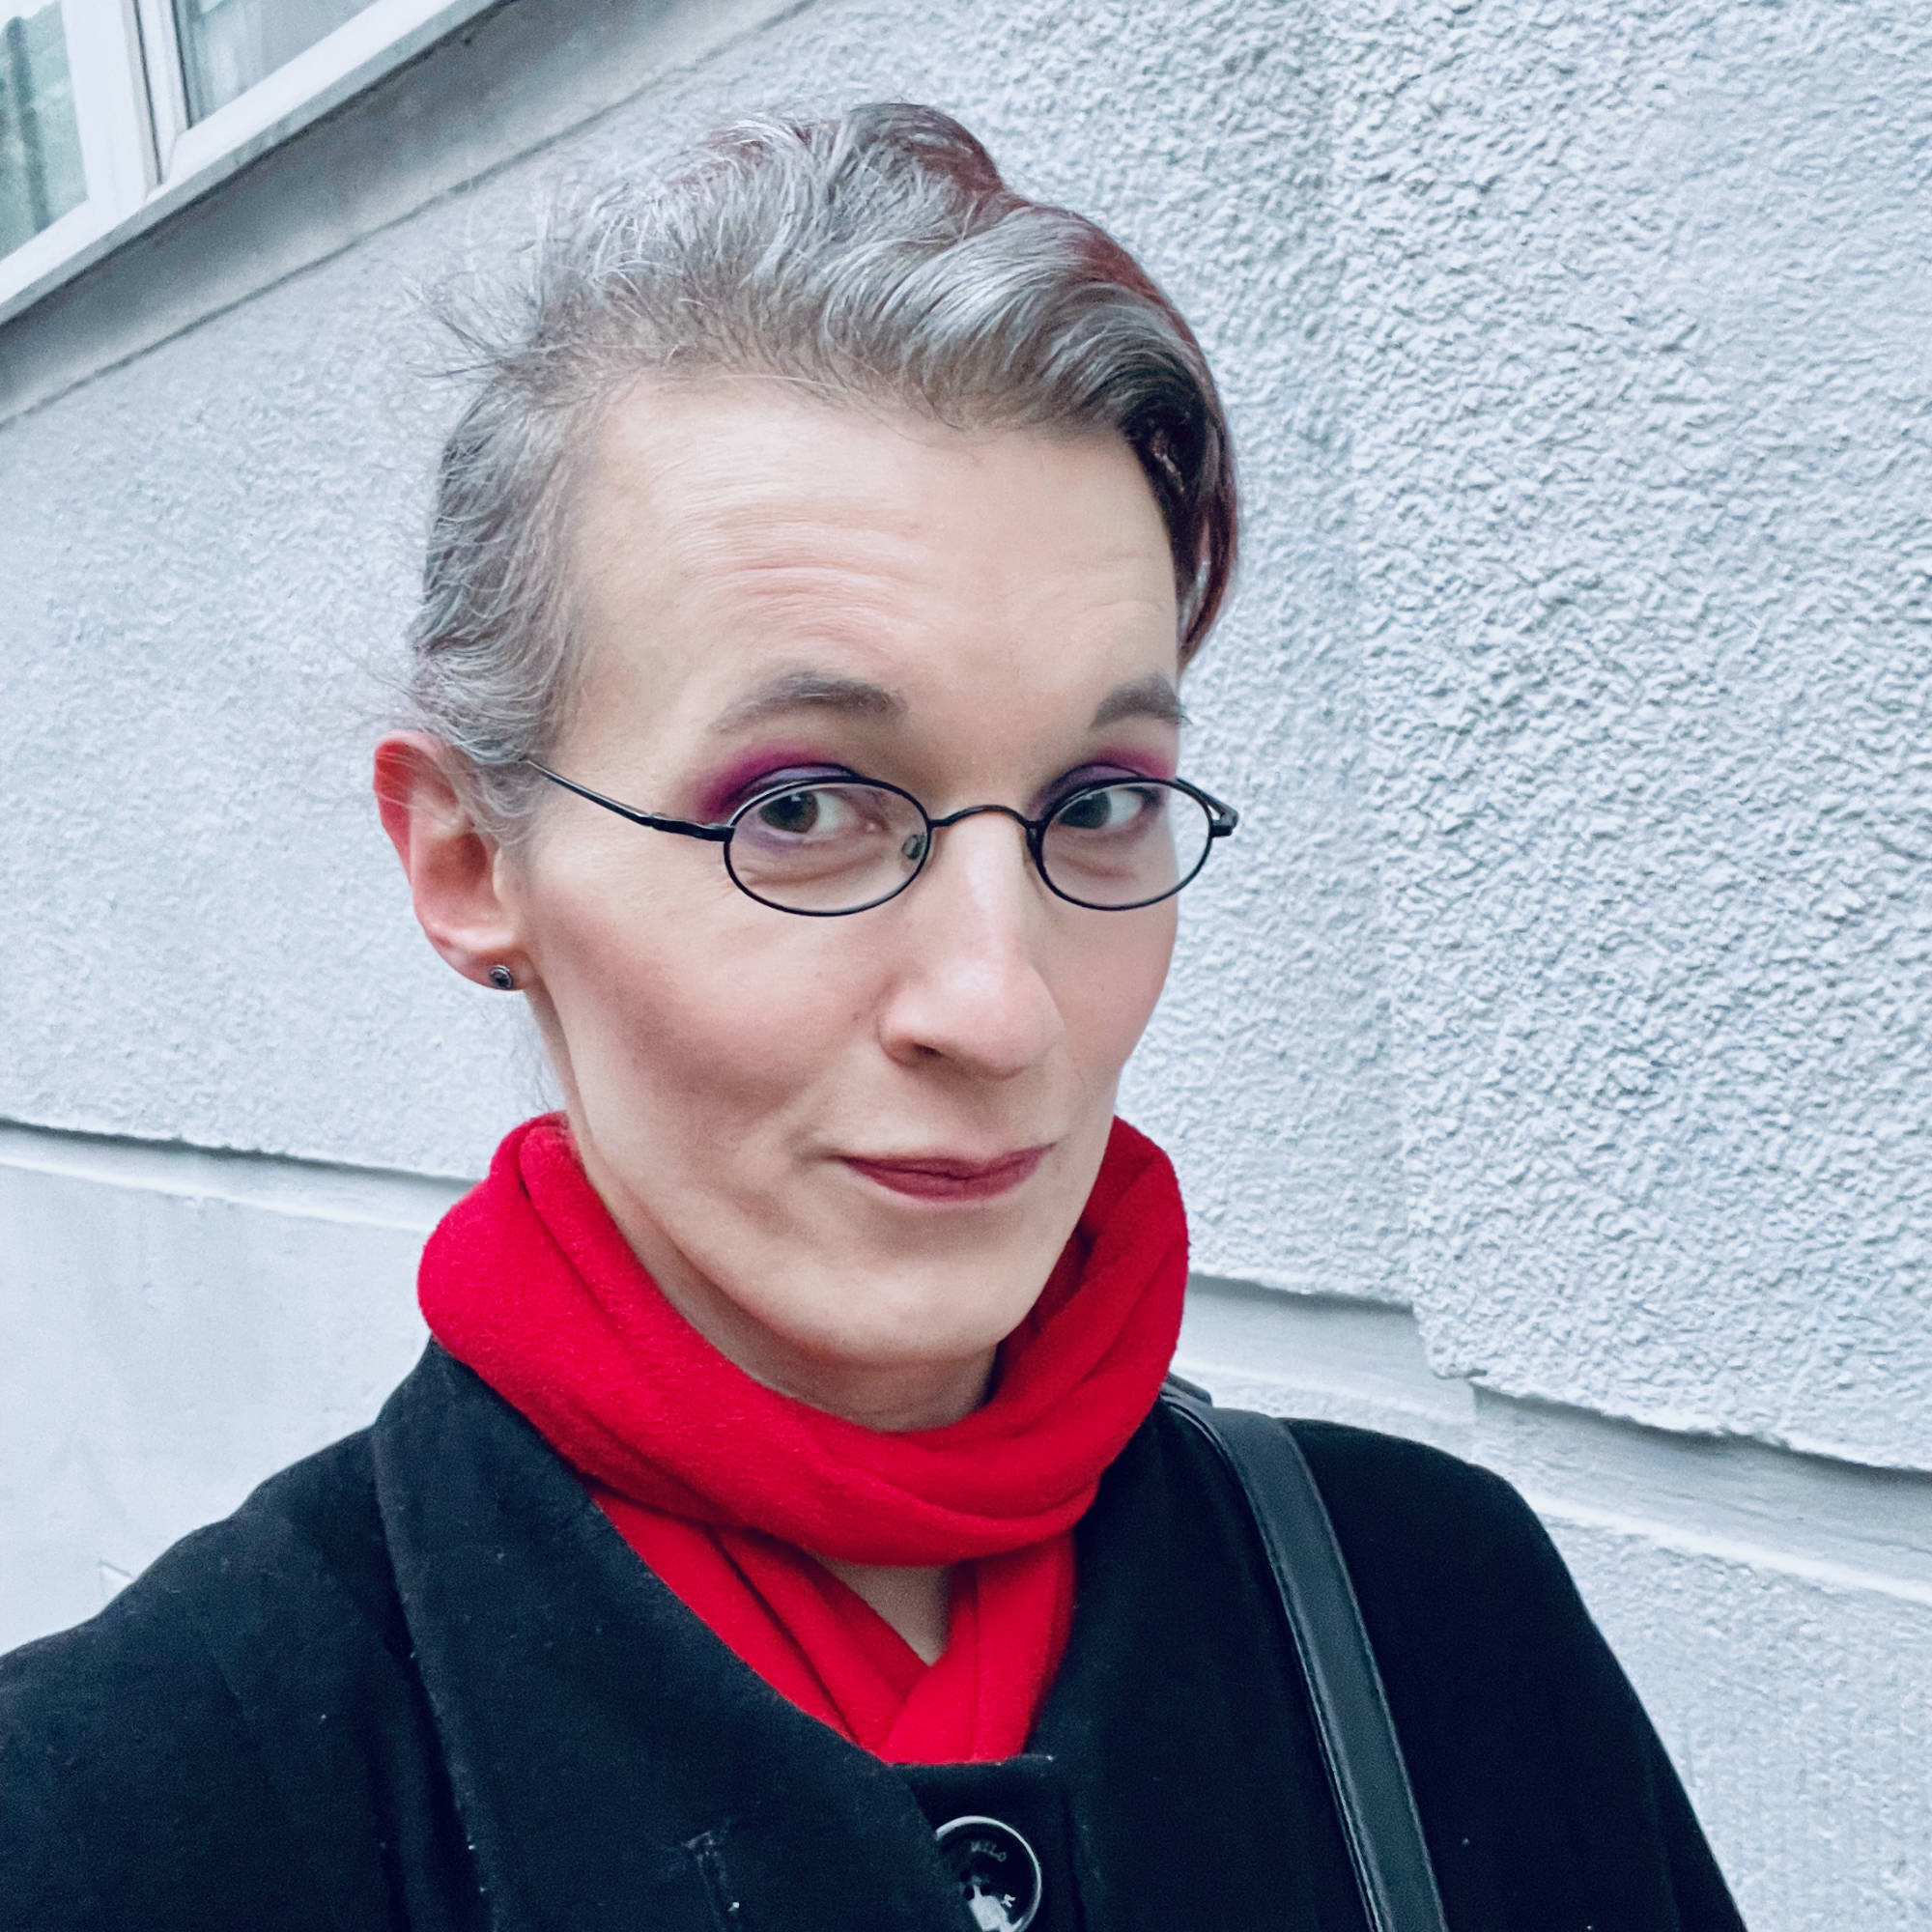 Selfie, outside, with relatively heavy make-up, wearing a black coat